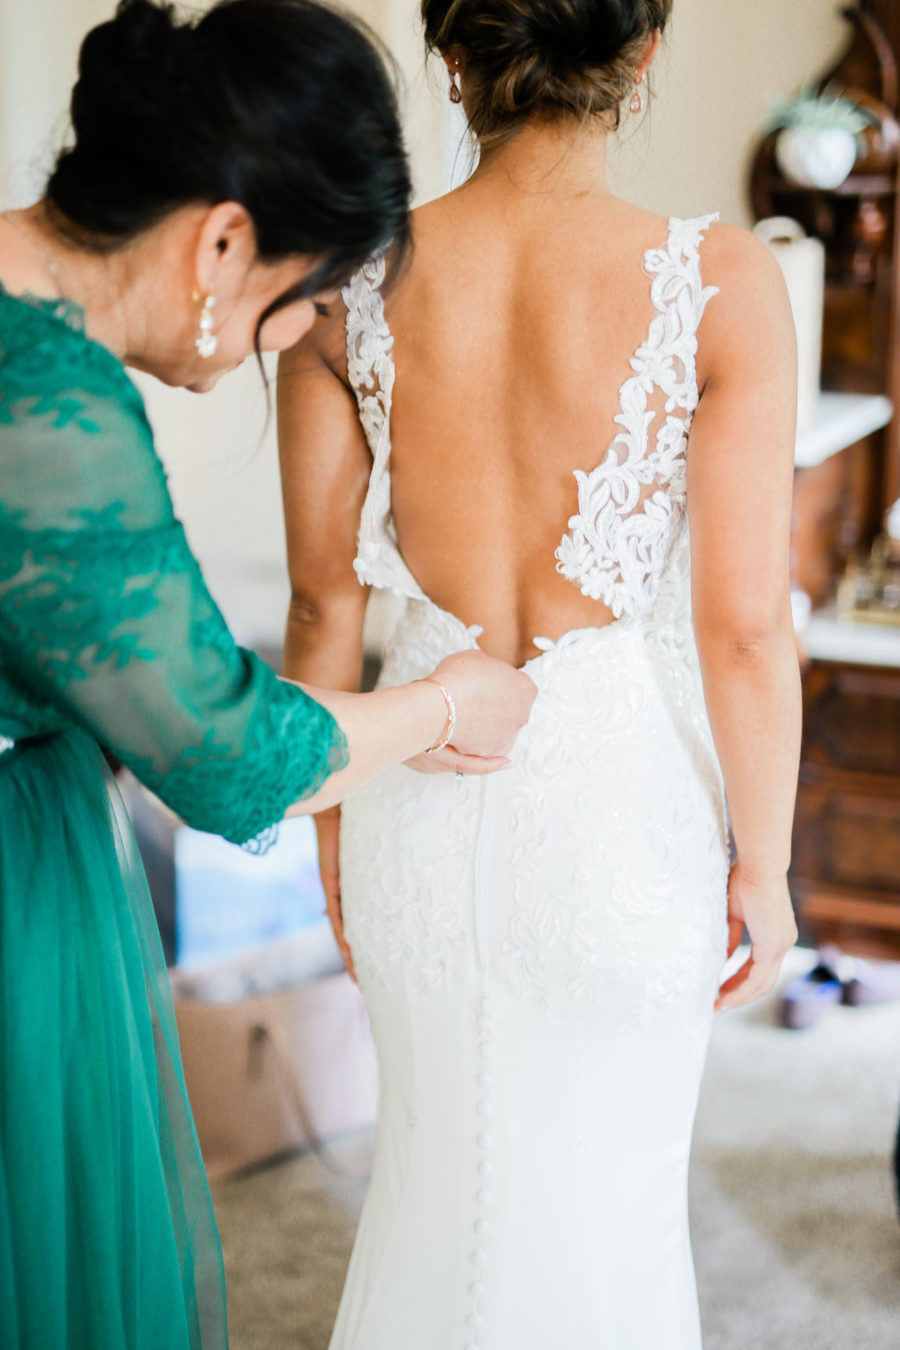 Lace wedding dress design captured by Maria Gloer Photography